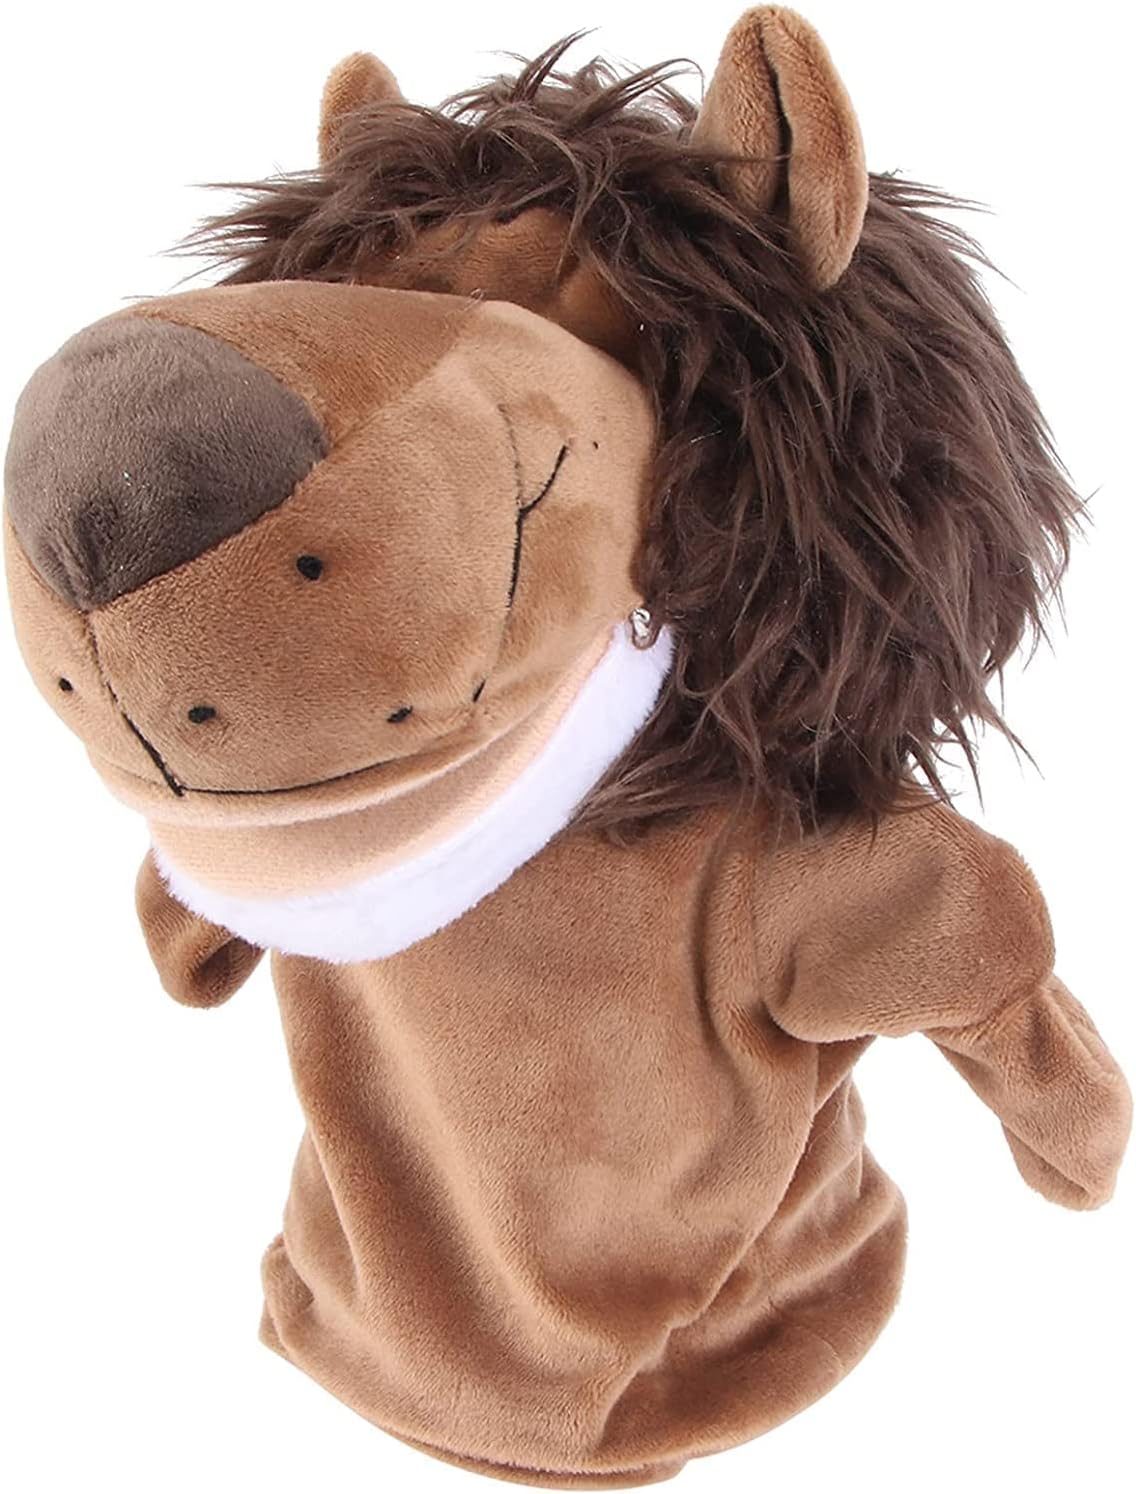 Hand Puppet, Plush Lion Plush Animal Toys for Imaginative Pretend Play Stocking Storytelling, Figure Finger Doll Parent-Child Interactive Toy Gift for Storytelling Teaching Preschool Role Play Toy